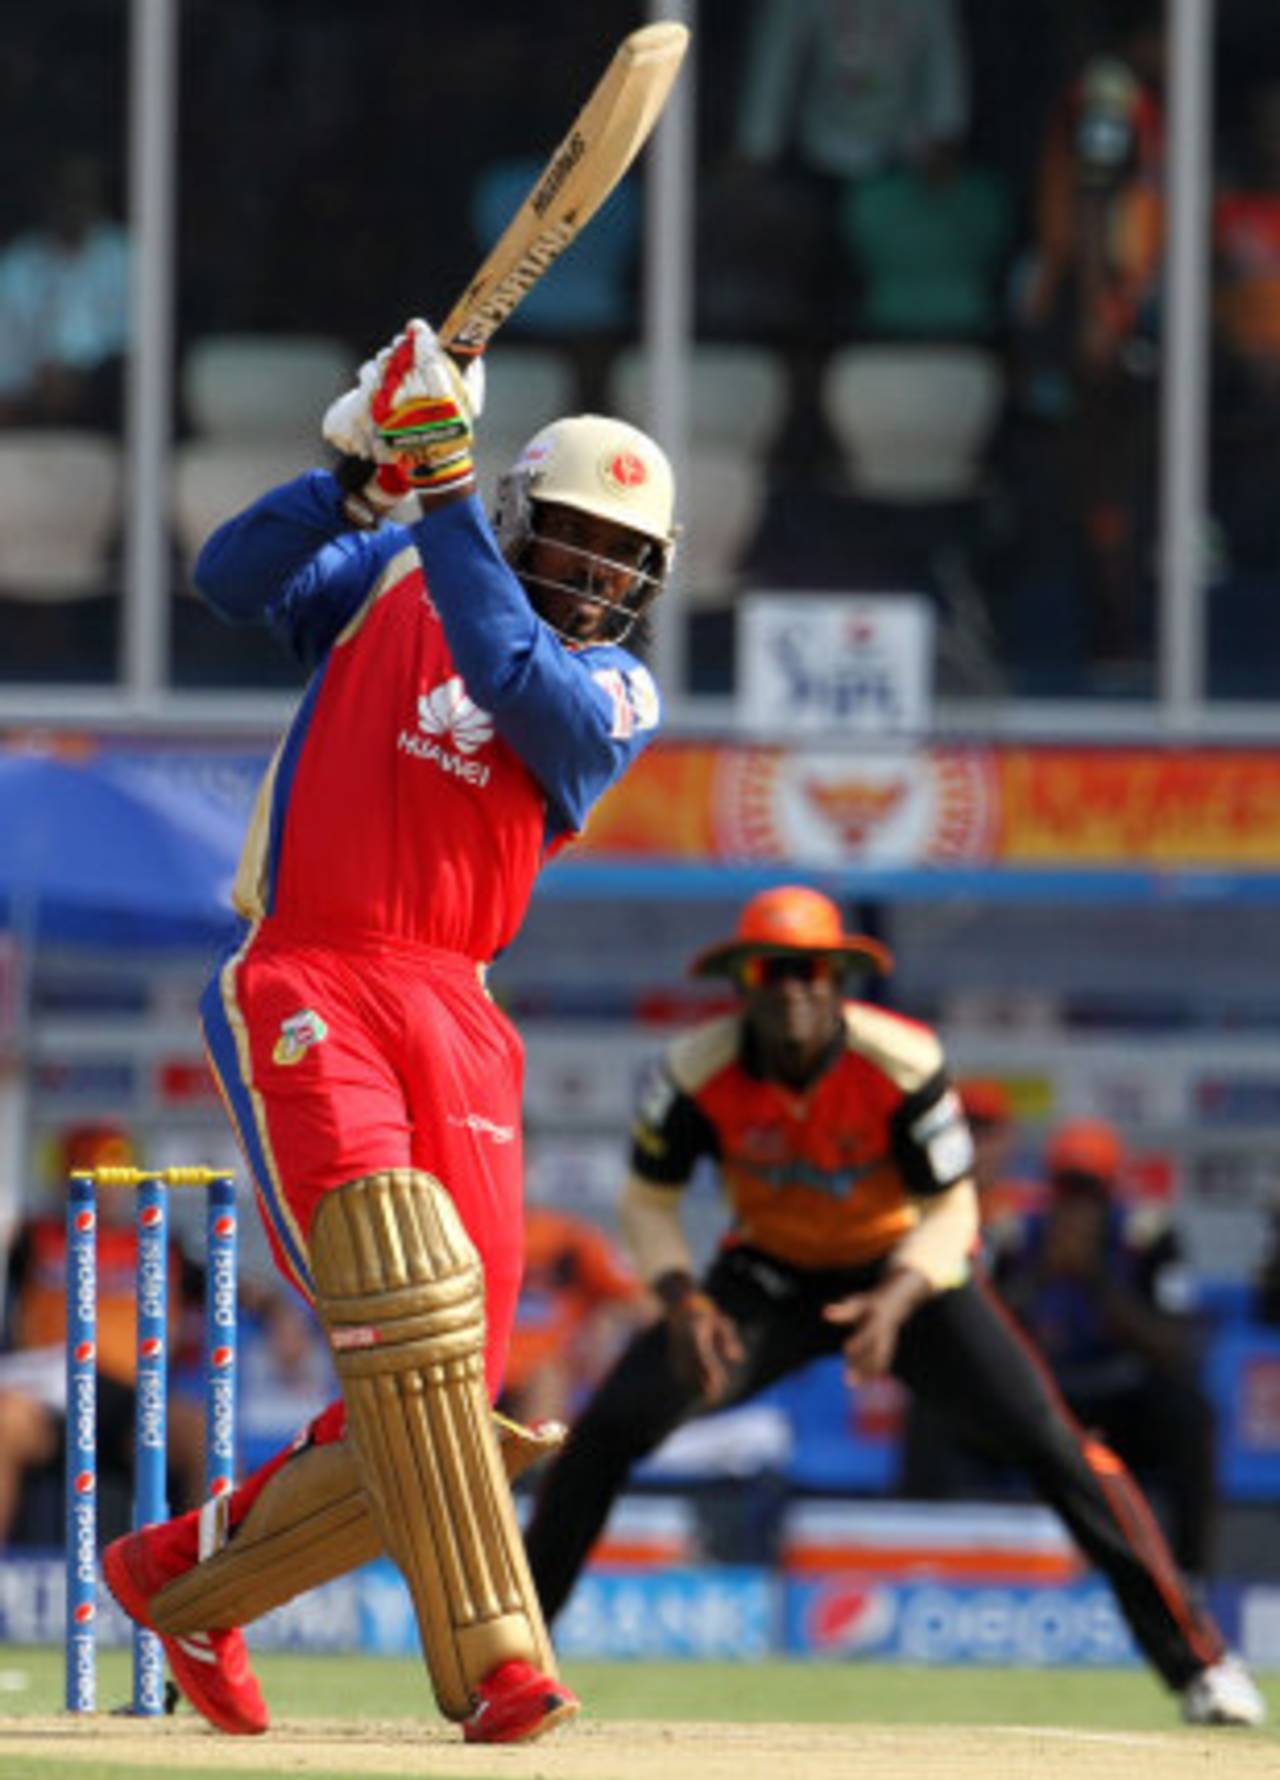 T20 gun for hire Chris Gayle epitomises the new breed of West Indian cricketer&nbsp;&nbsp;&bull;&nbsp;&nbsp;BCCI